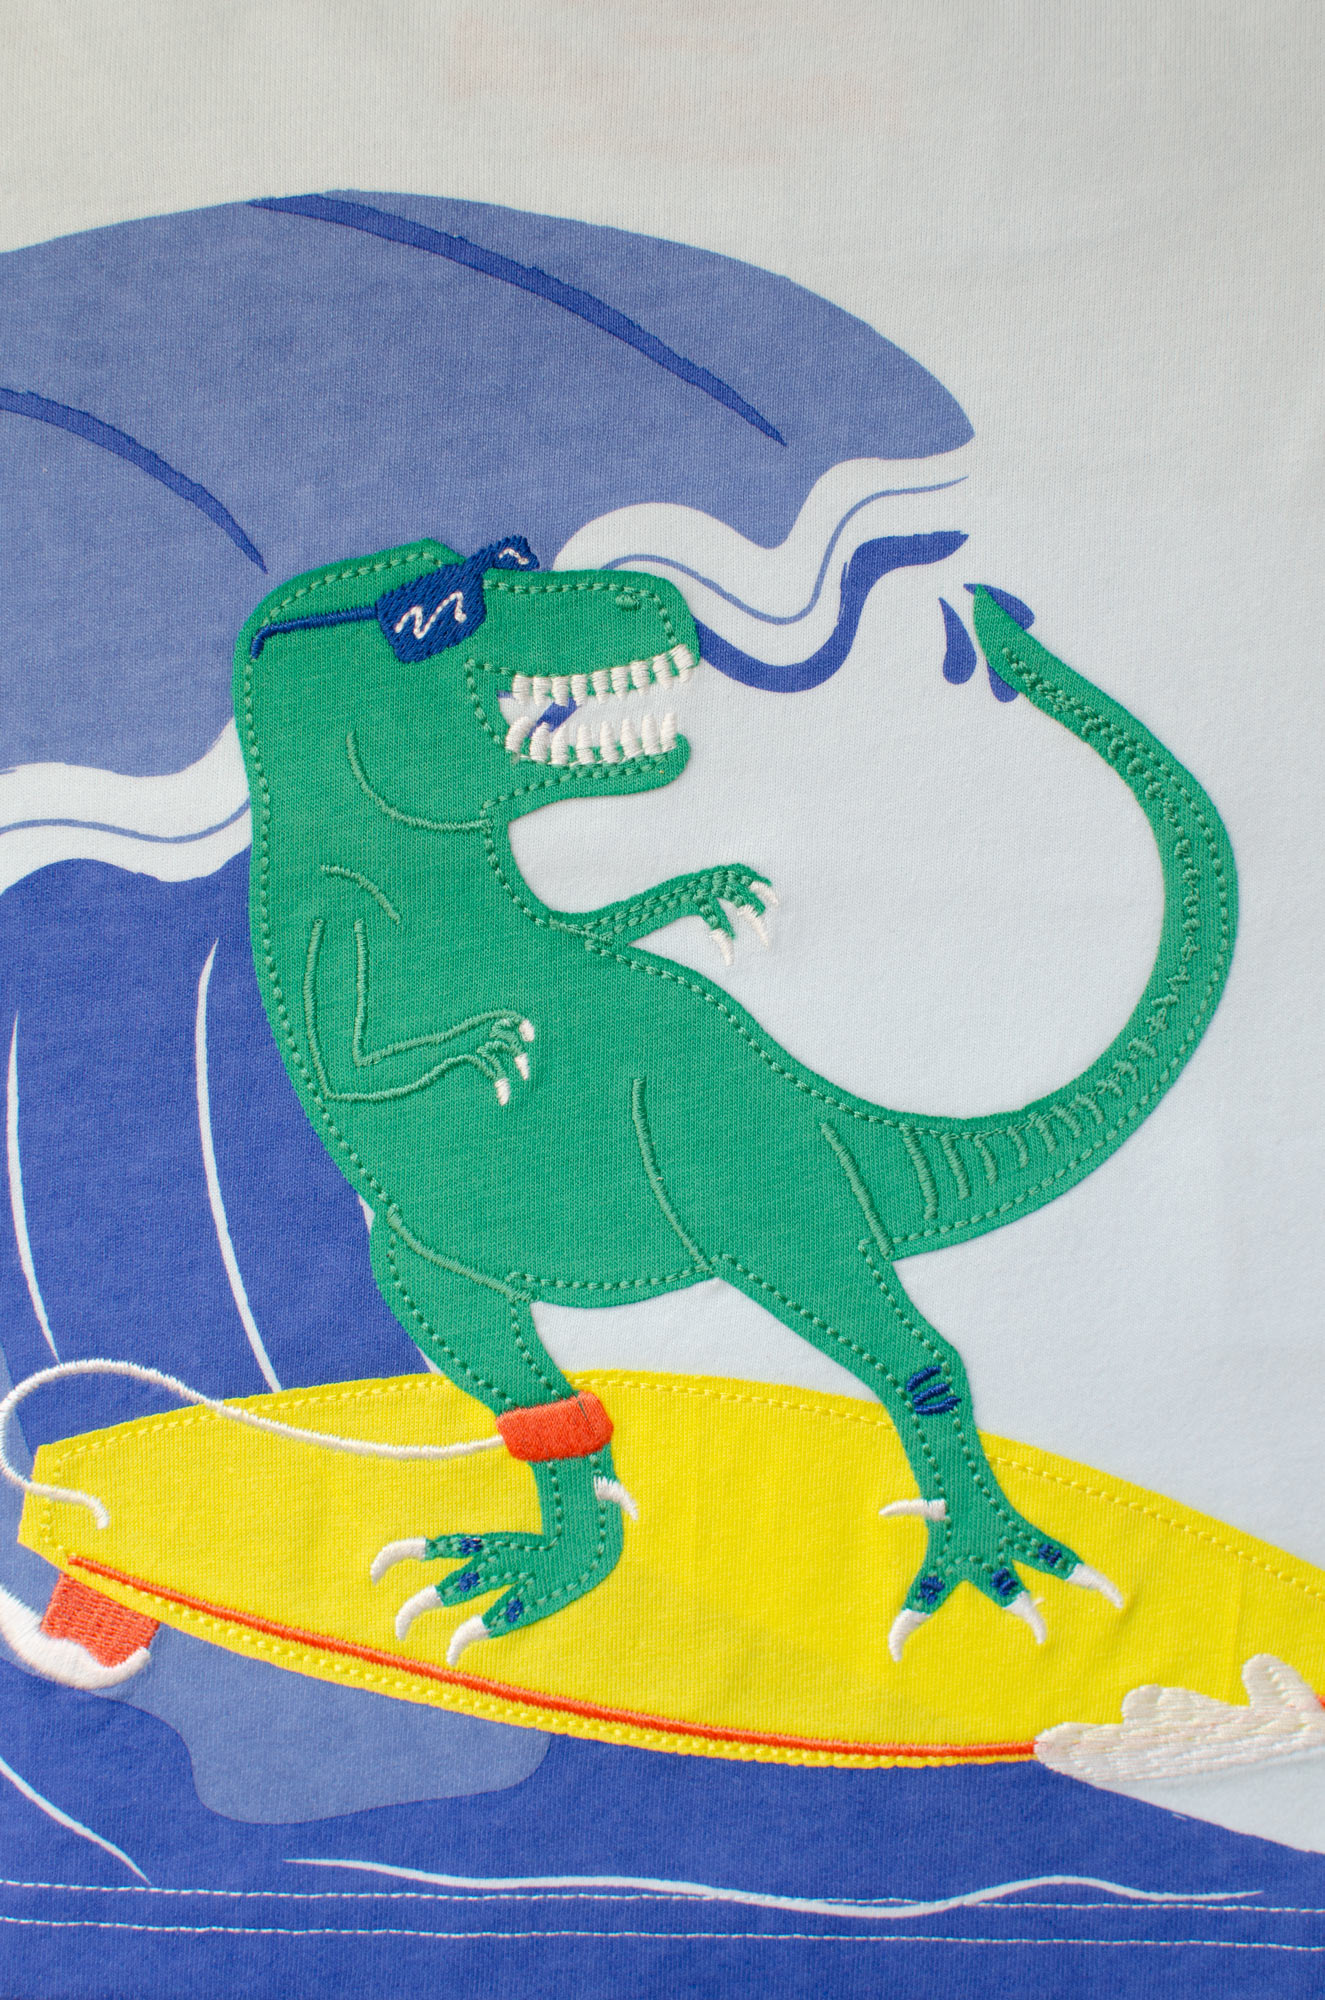 Surfing Dinosaur Print by Elly Jahnz for Joules